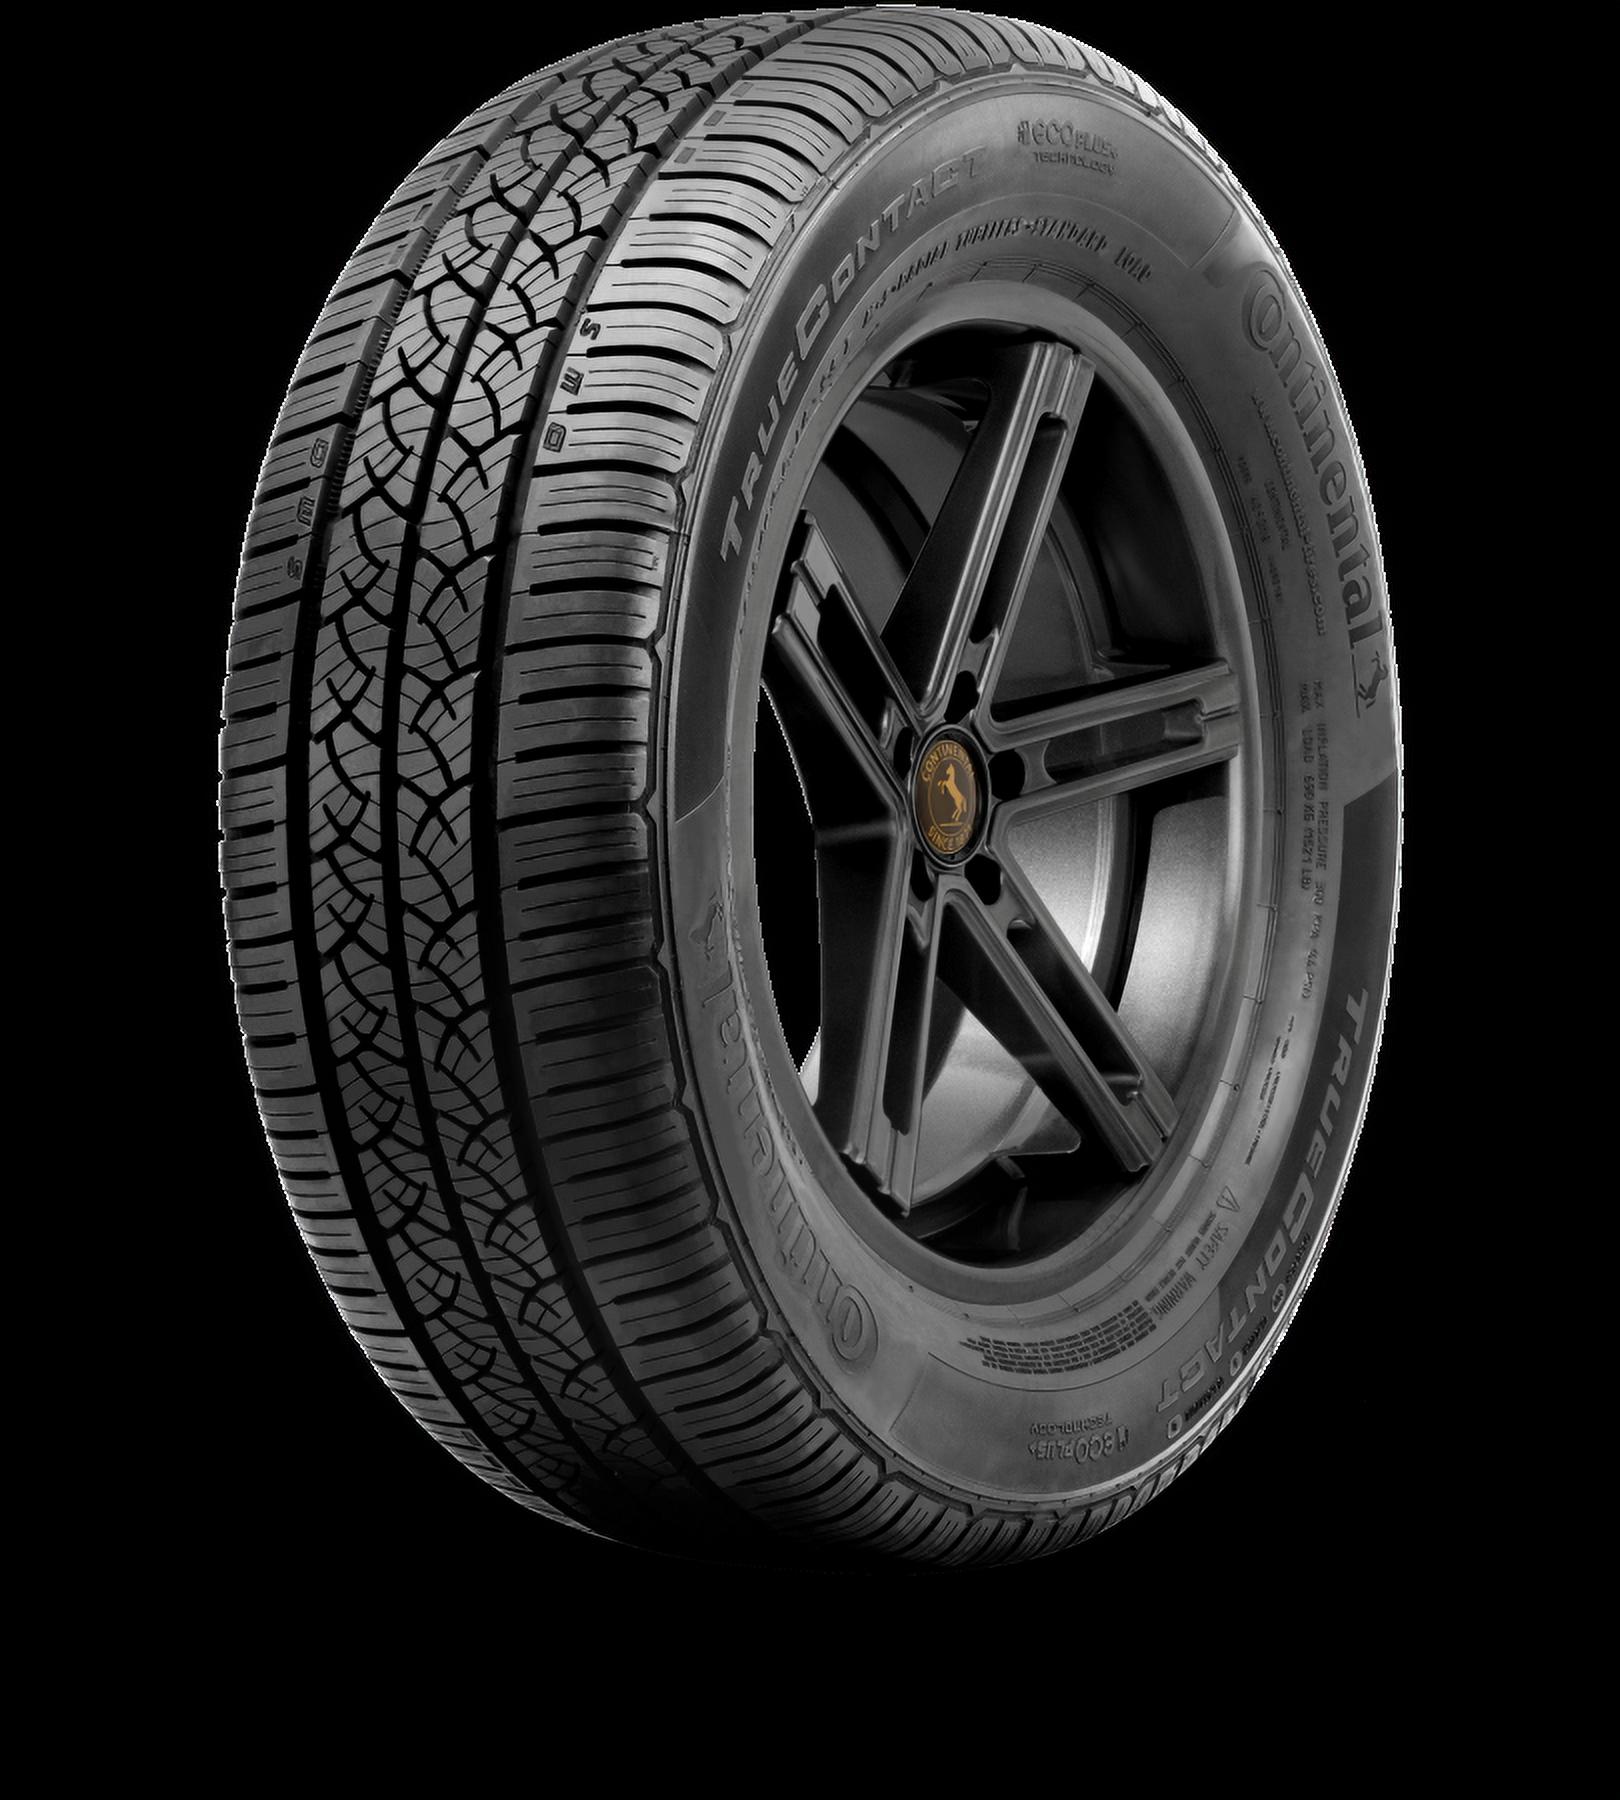 Continental TrueContact 225/60R16 98 T Tire - image 1 of 3